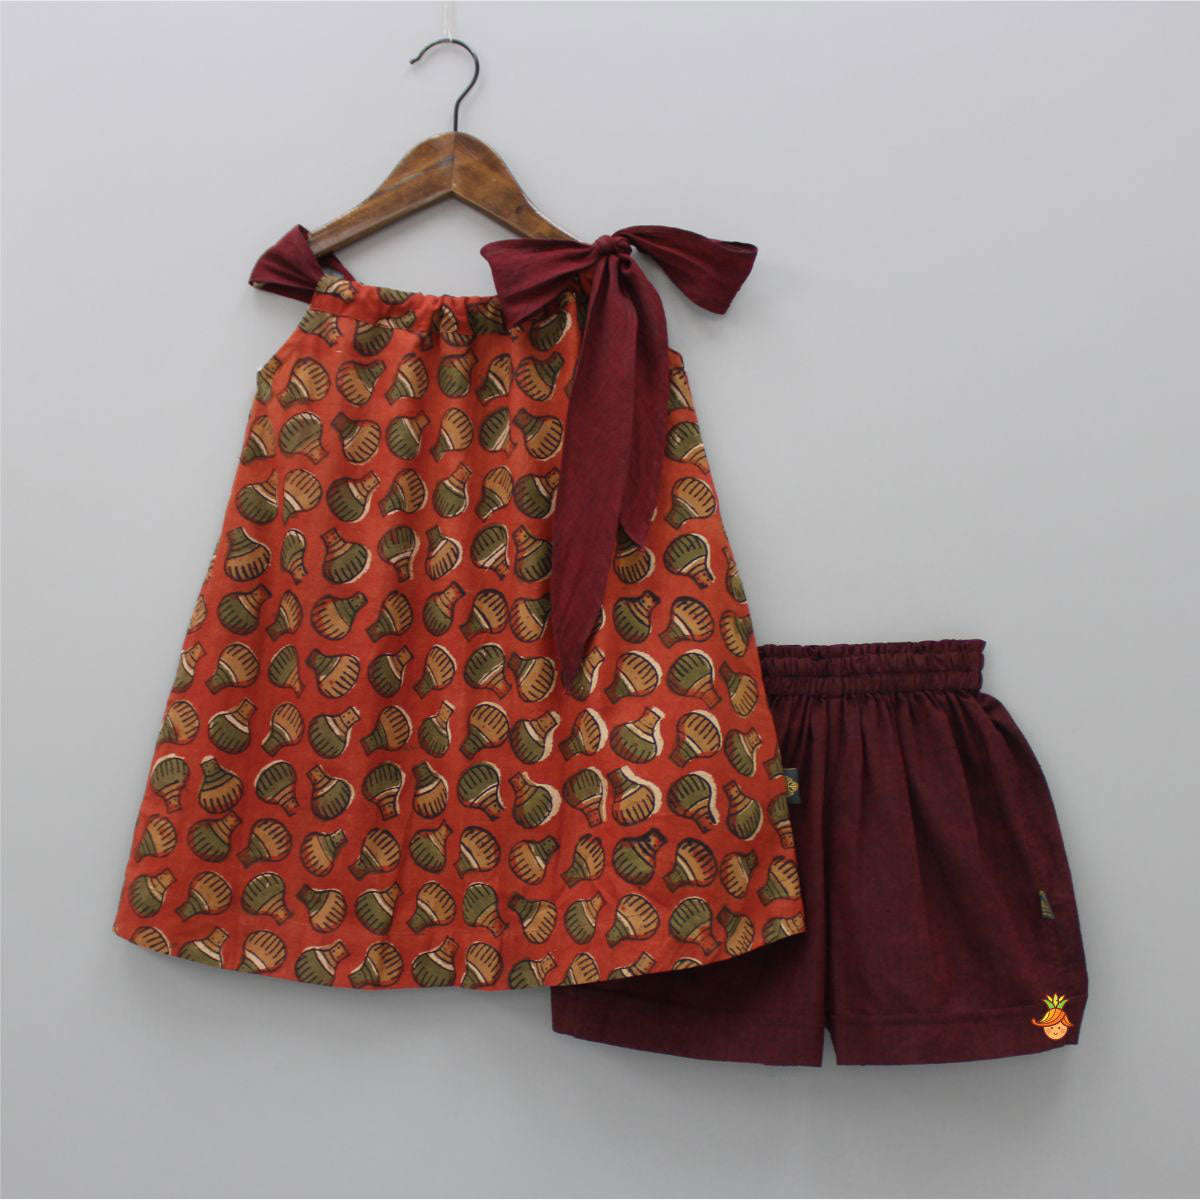 Hand Block Printed Tie Up Top And Burgundy Shorts